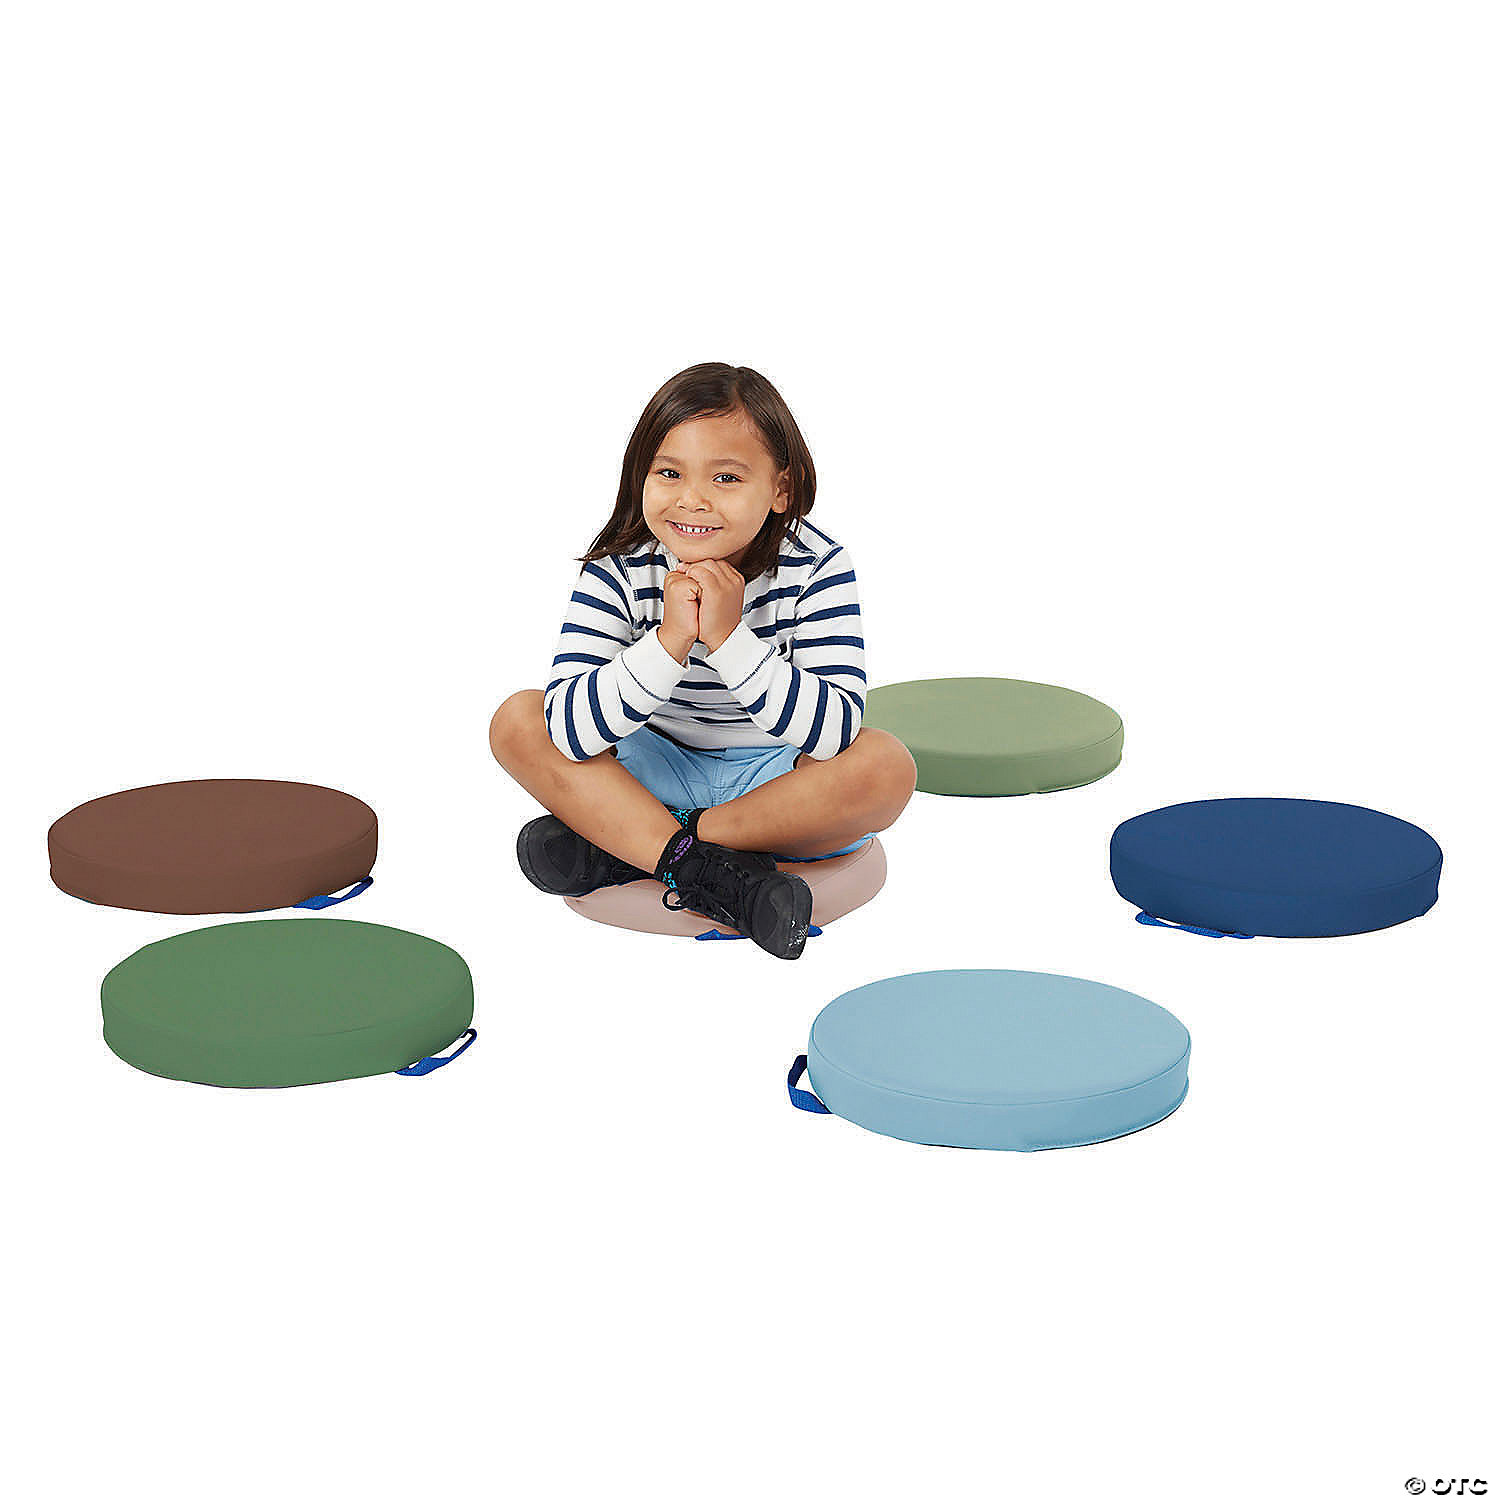 6-Piece - Earthtone SoftScape Hexagon Floor Cushions with Handles for Flexible Seating Classrooms 2 inch Thick Deluxe Foam 